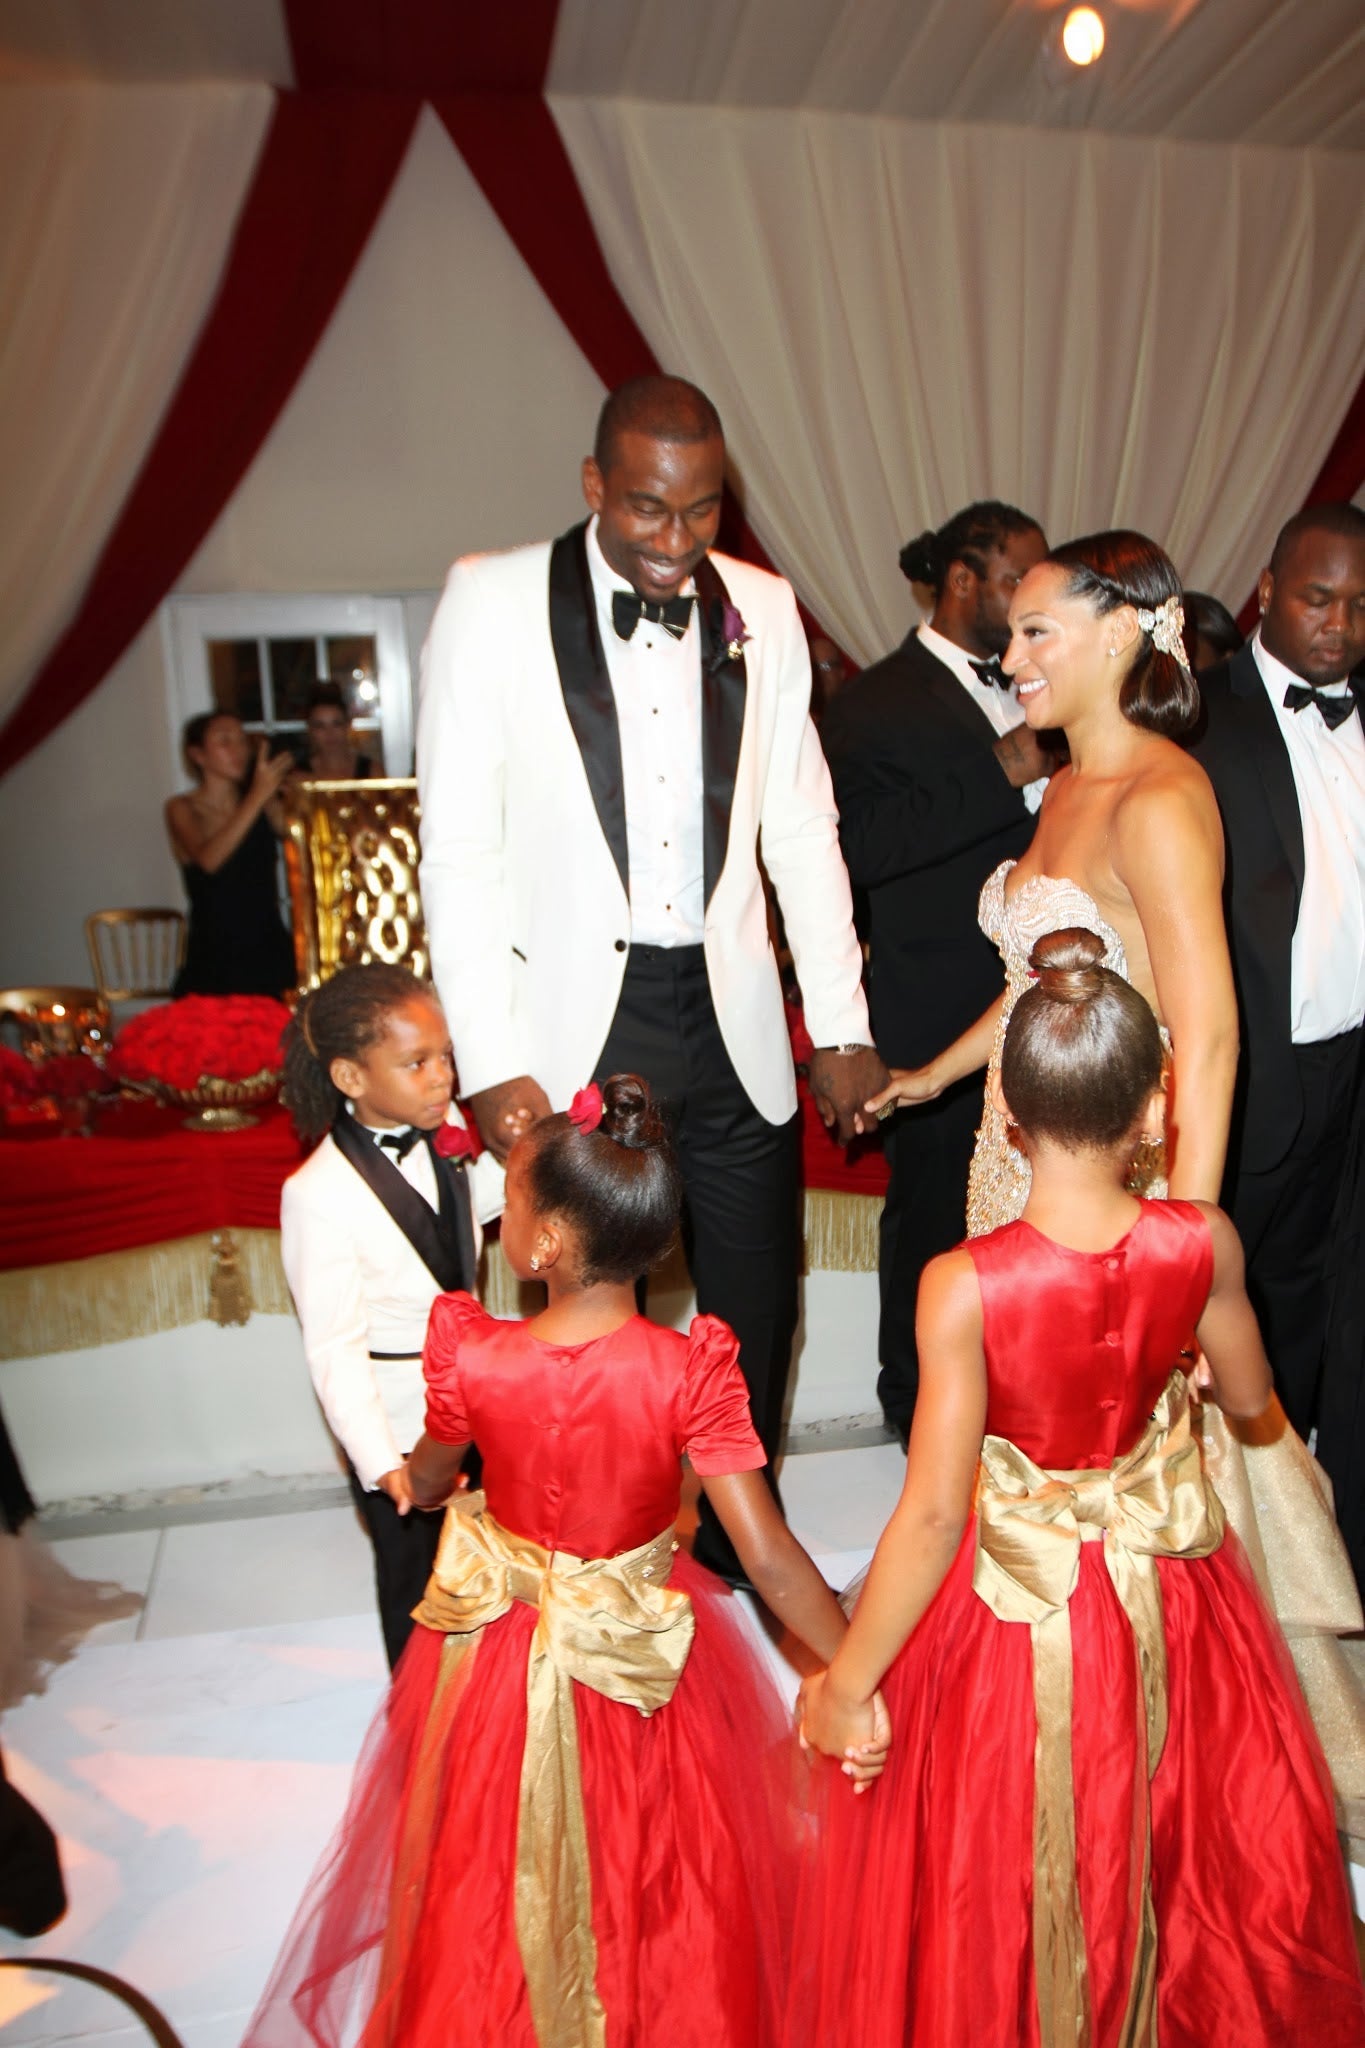 Exclusive: Amar'e Stoudemire and Alexis Welch's Wedding Photos